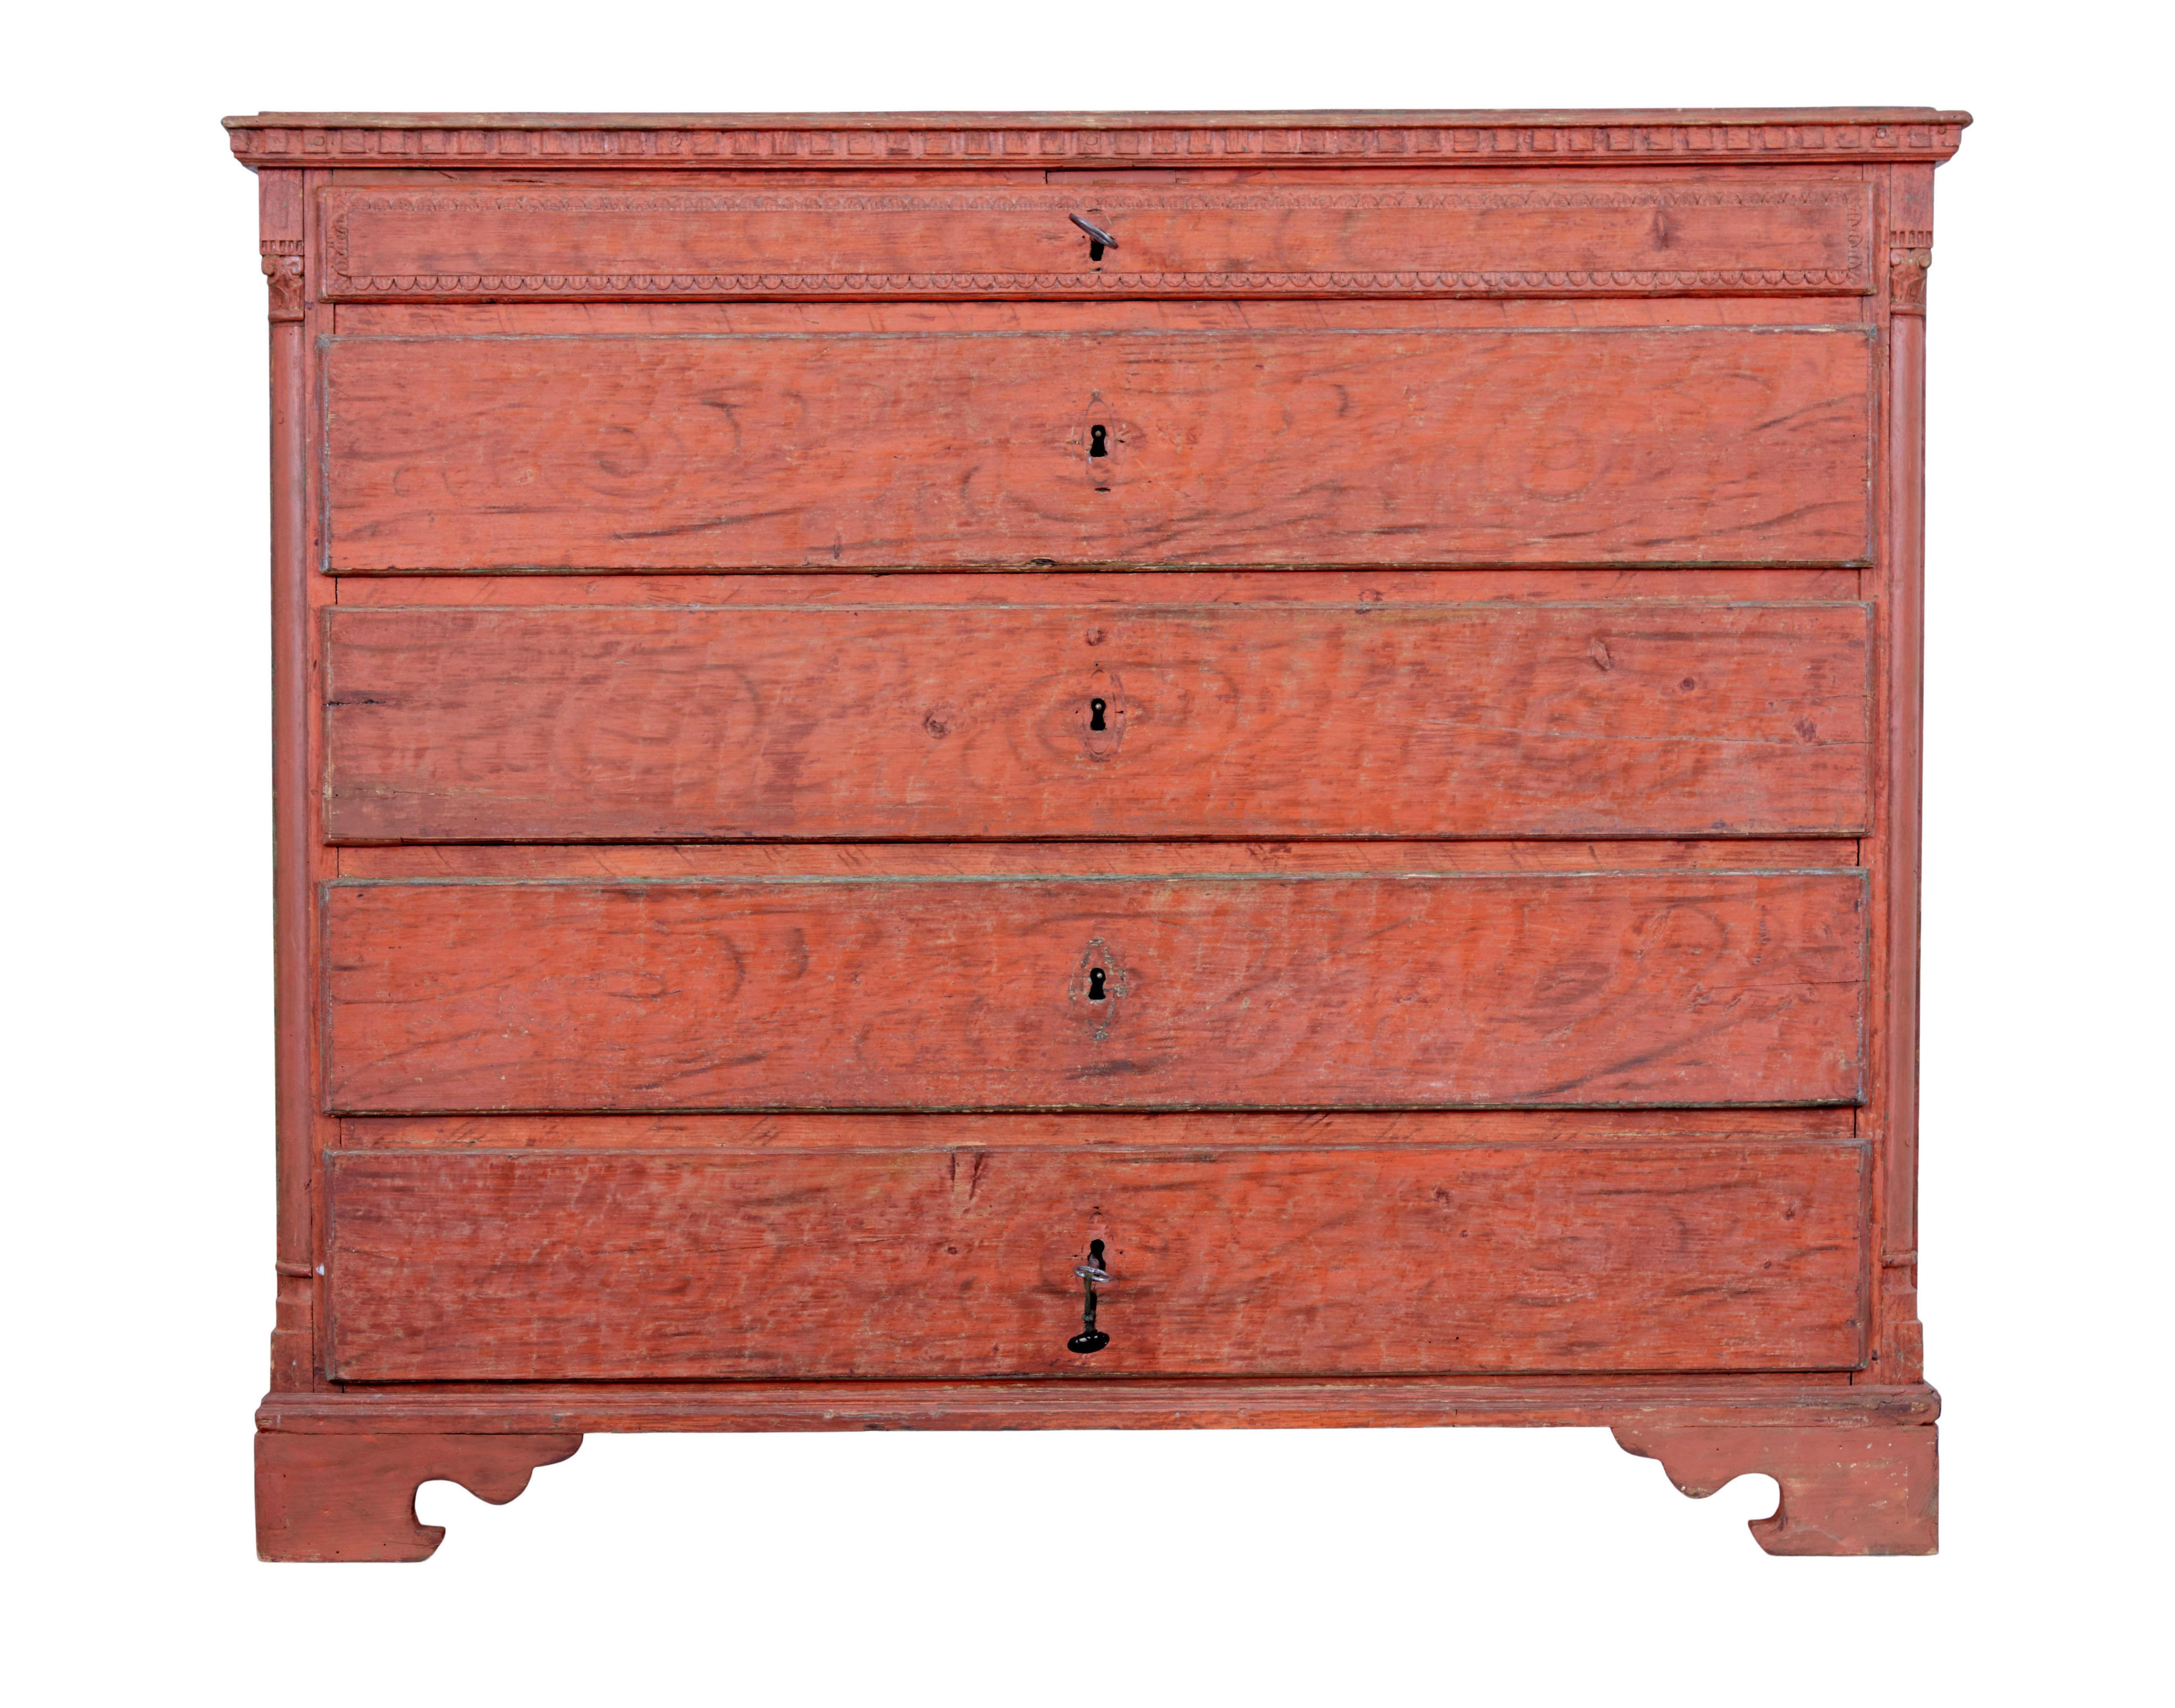 Late 18th century Swedish Gustavian painted chest of drawers, circa 1790.

Fine quality oak and pine Gustavian period commode, with scraped back paint.

5 drawer chest with a small drawer just below the top surface and 4 more of equal size.  1 key